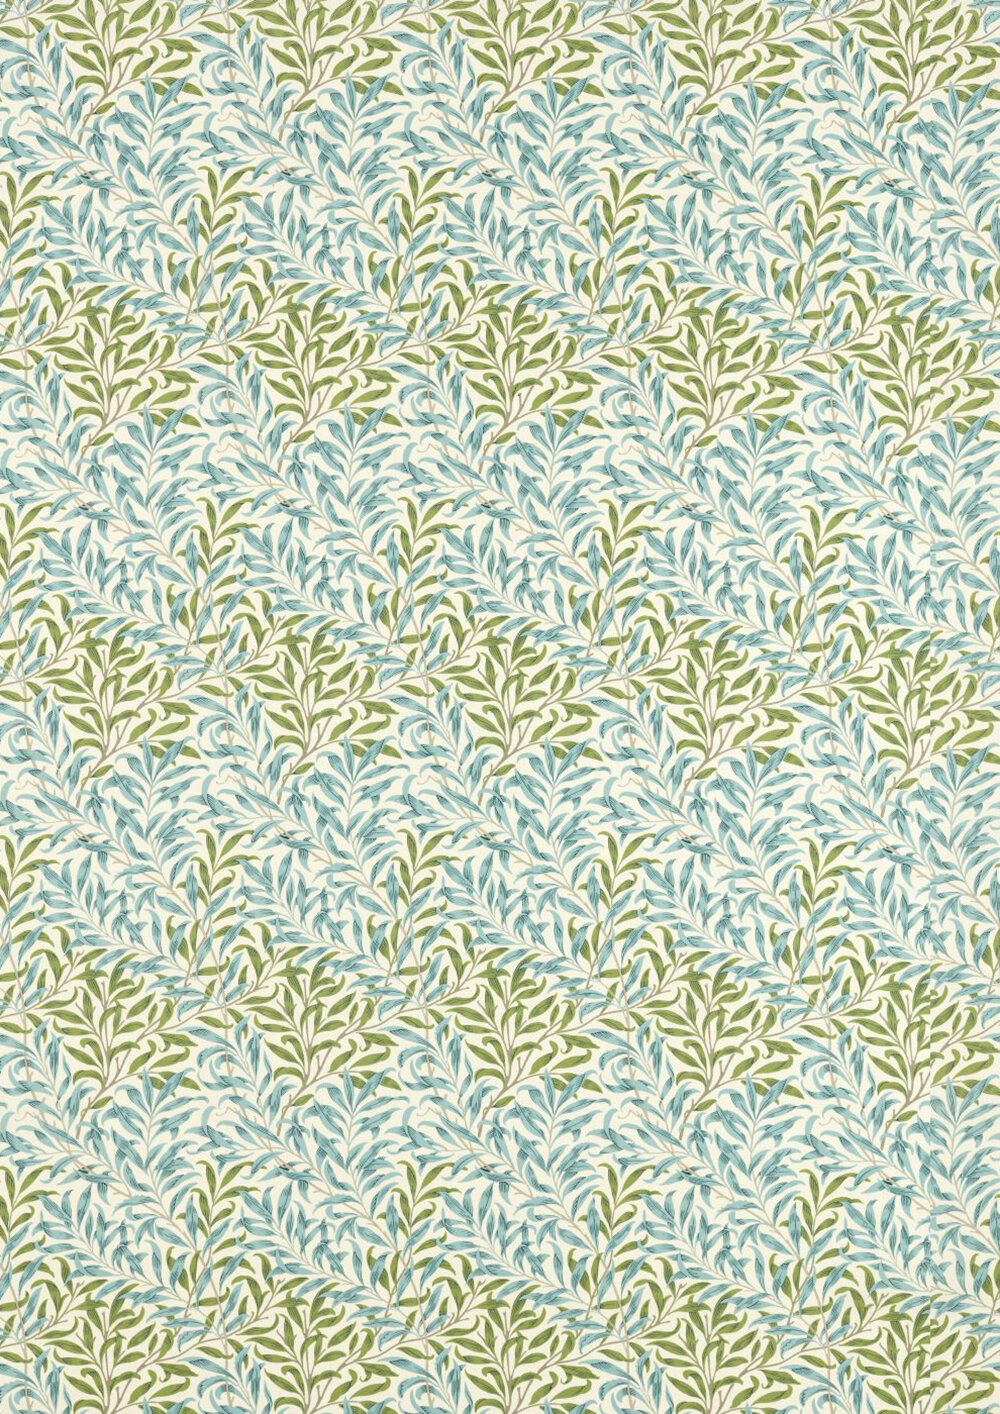 Willow Bough Fabric - Nettle / Sky Blue - by Morris